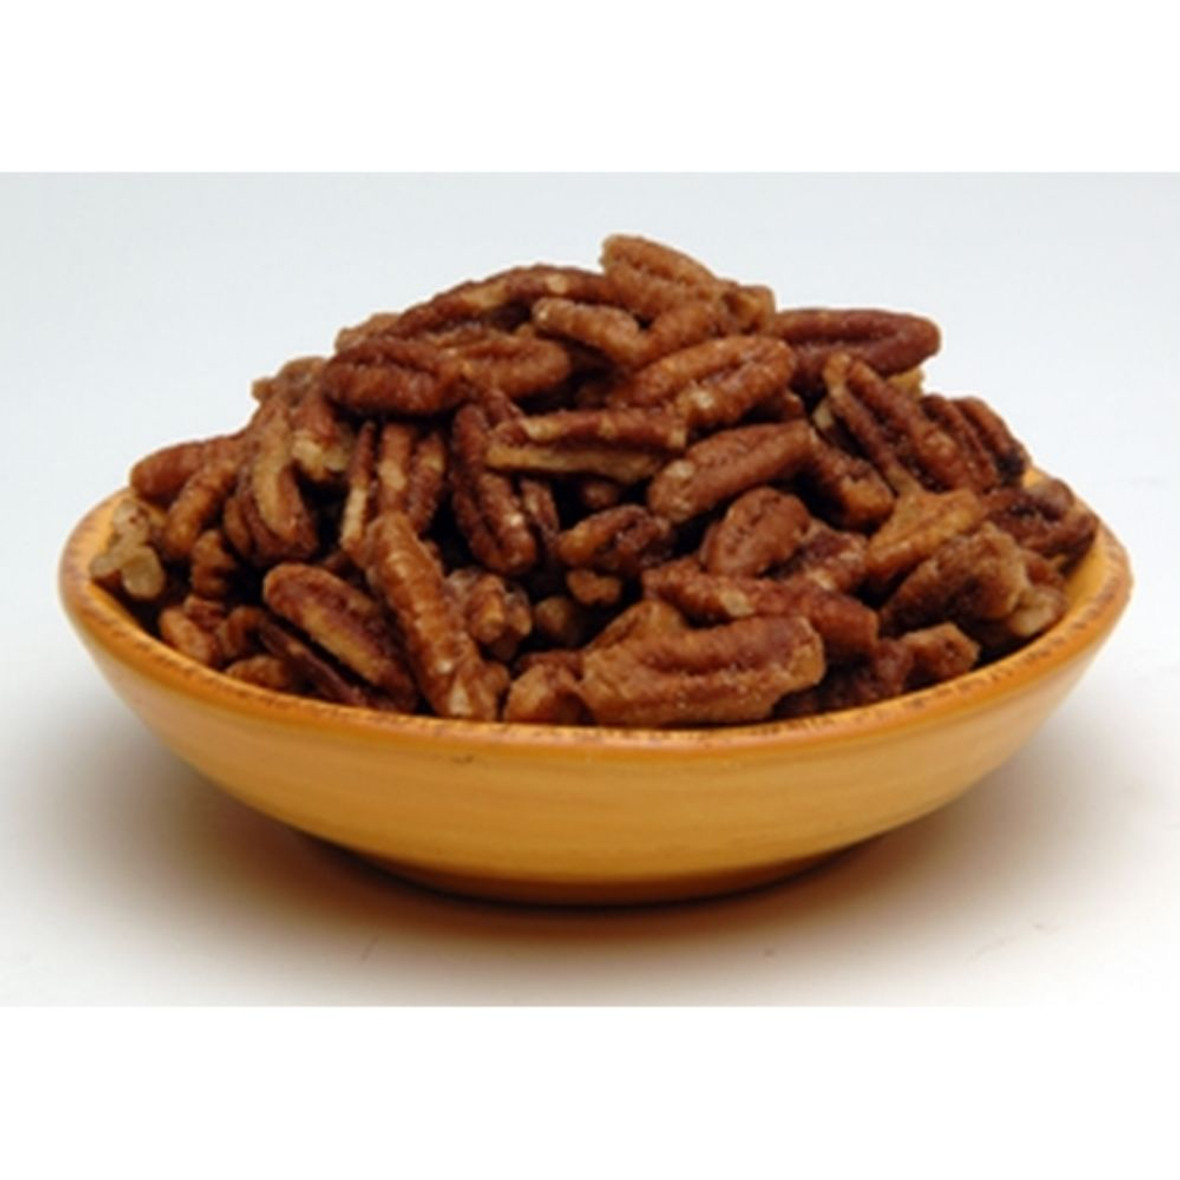 Chef Xpress Large Candied Pecan Pieces